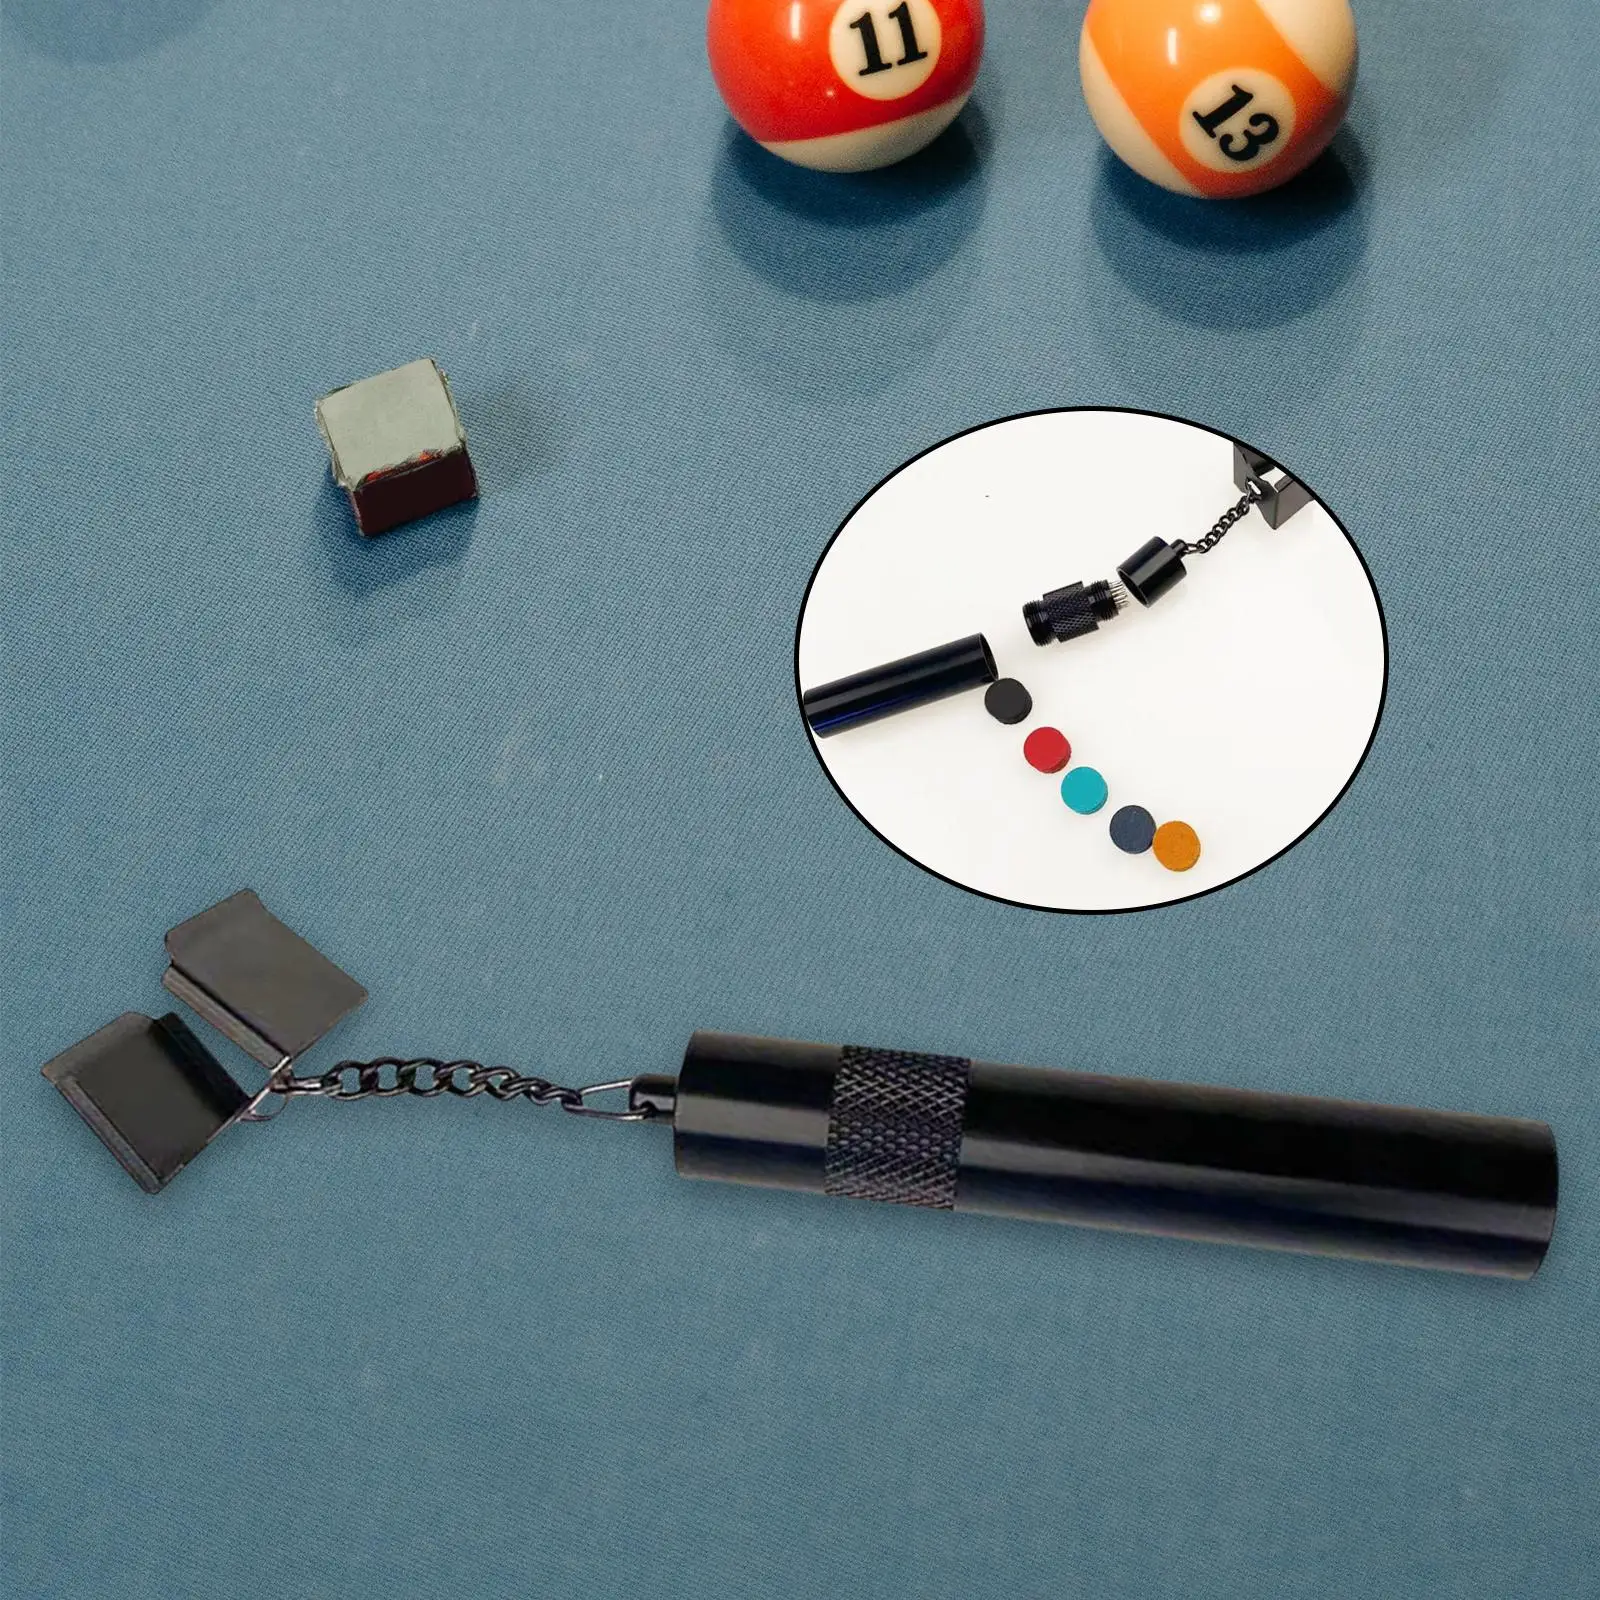 Pool Chalk Holder for Billiards, Portable Pool Table Accessories, Durable and Multi Use Cue Tip